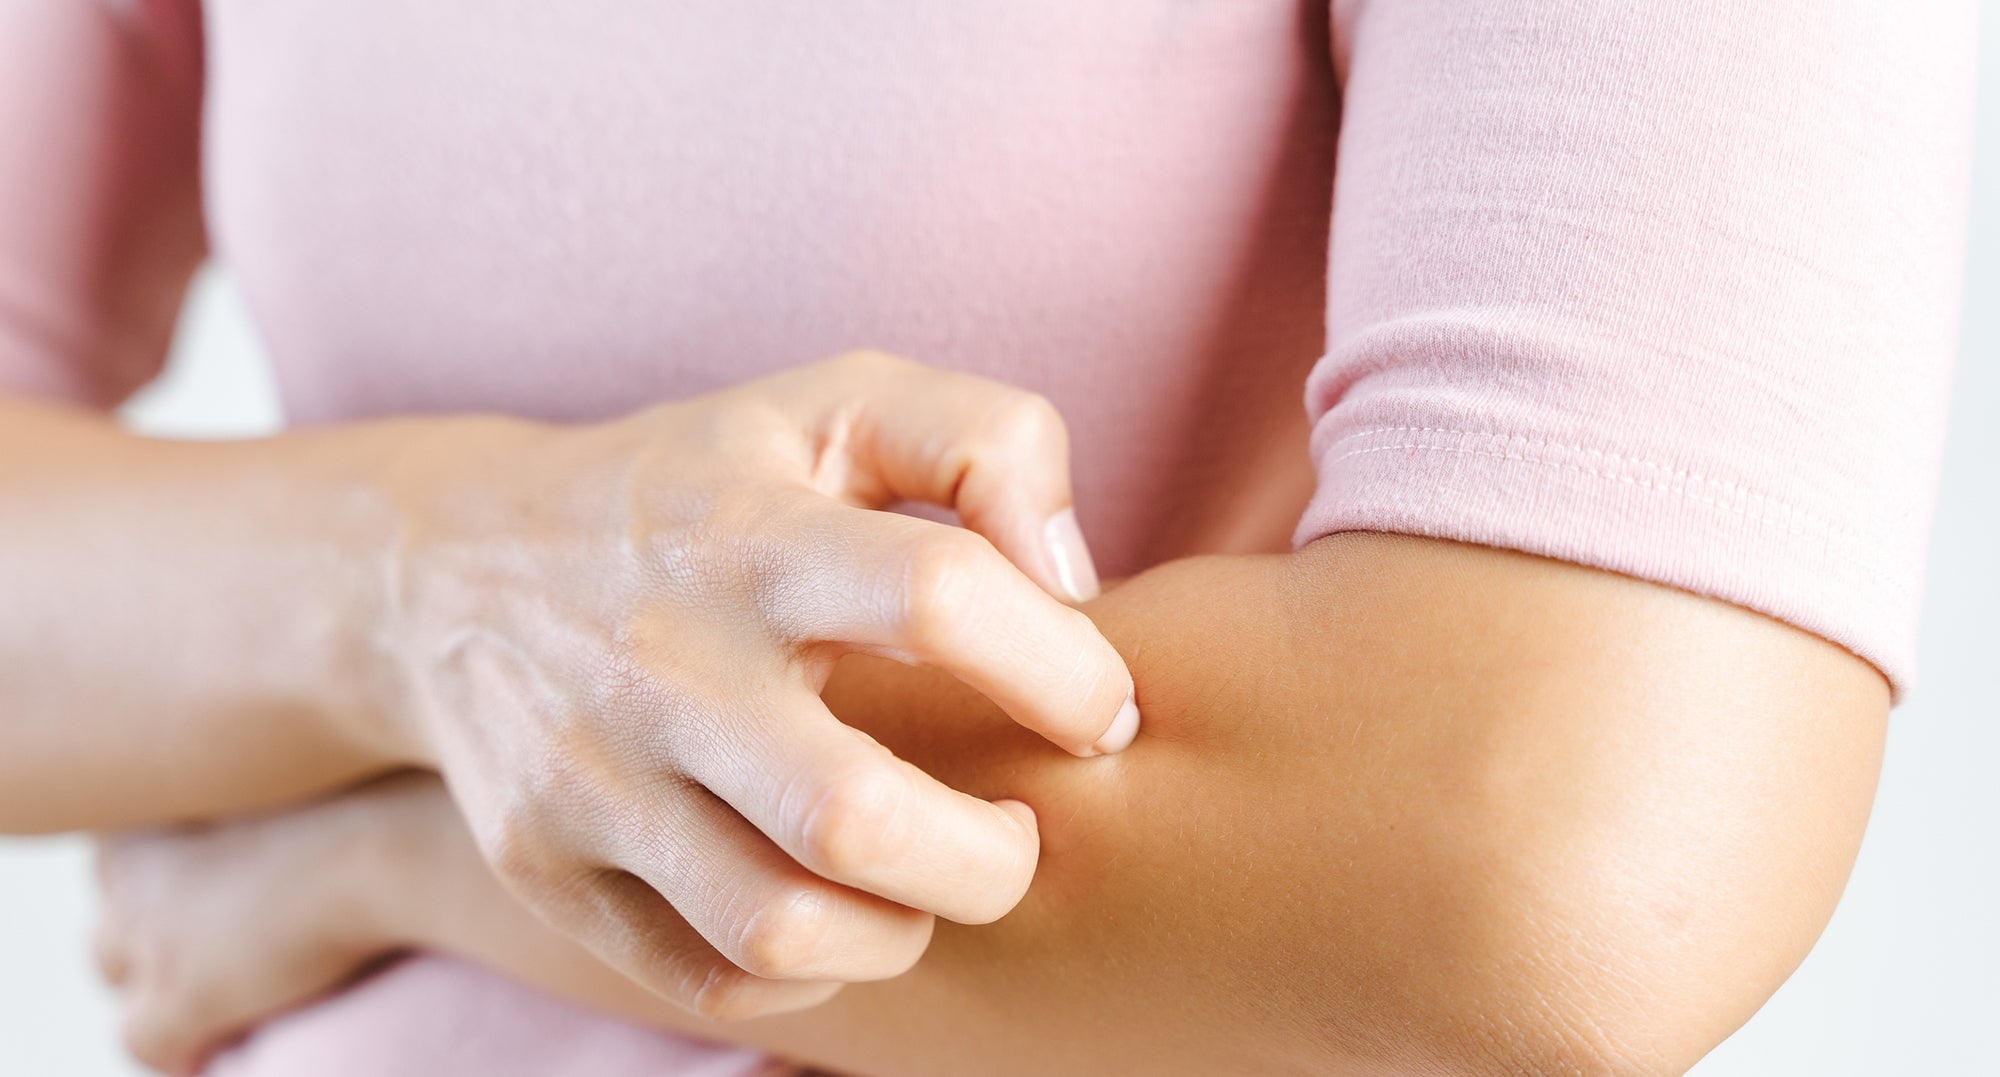 Midsection Of Woman Scratching Hand Against White Background